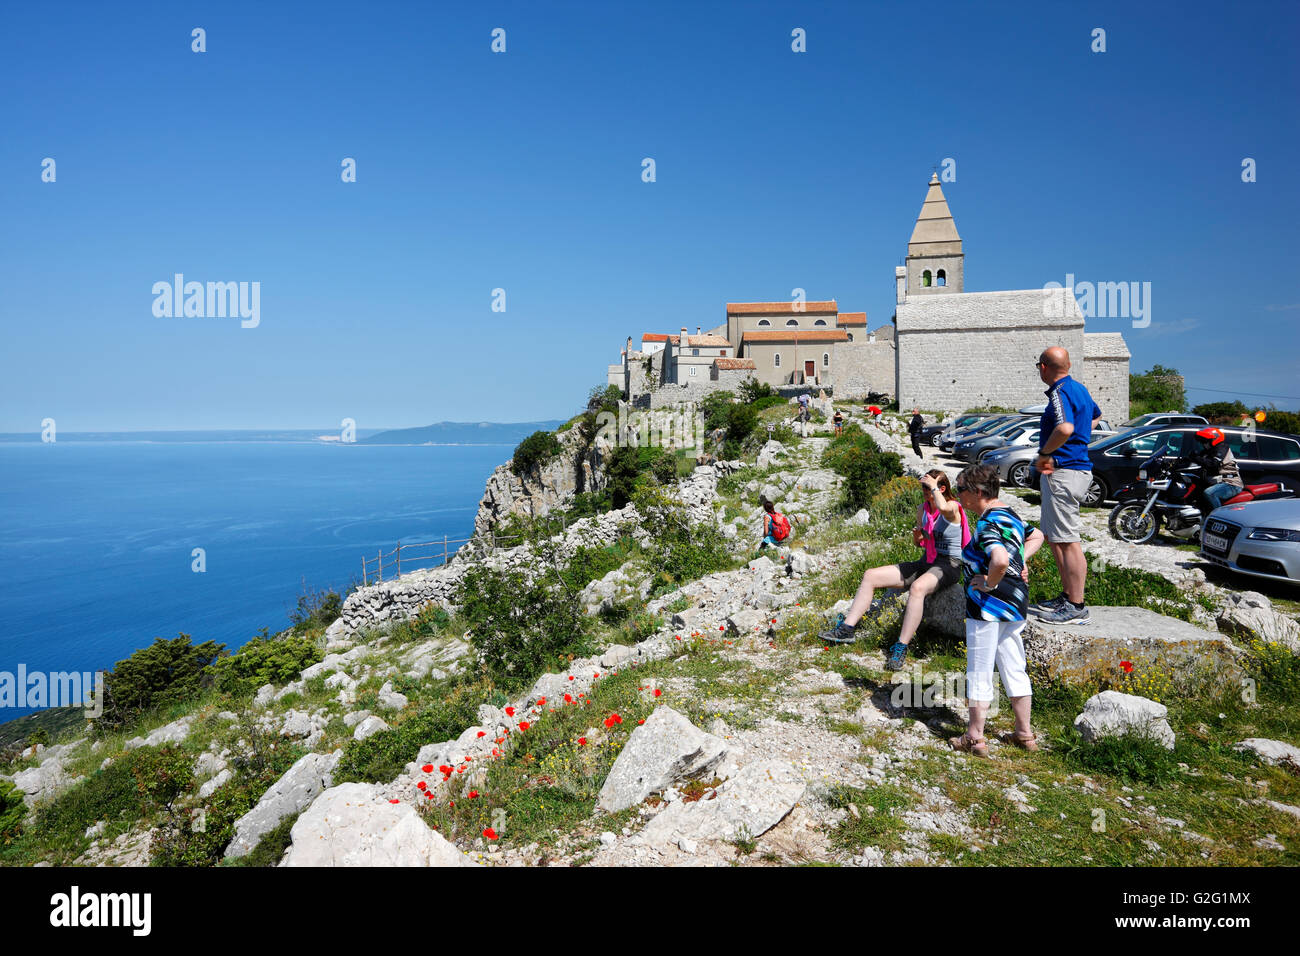 A group of tourists on their visit to the Lubenice town on the hilly Island of Cres Stock Photo